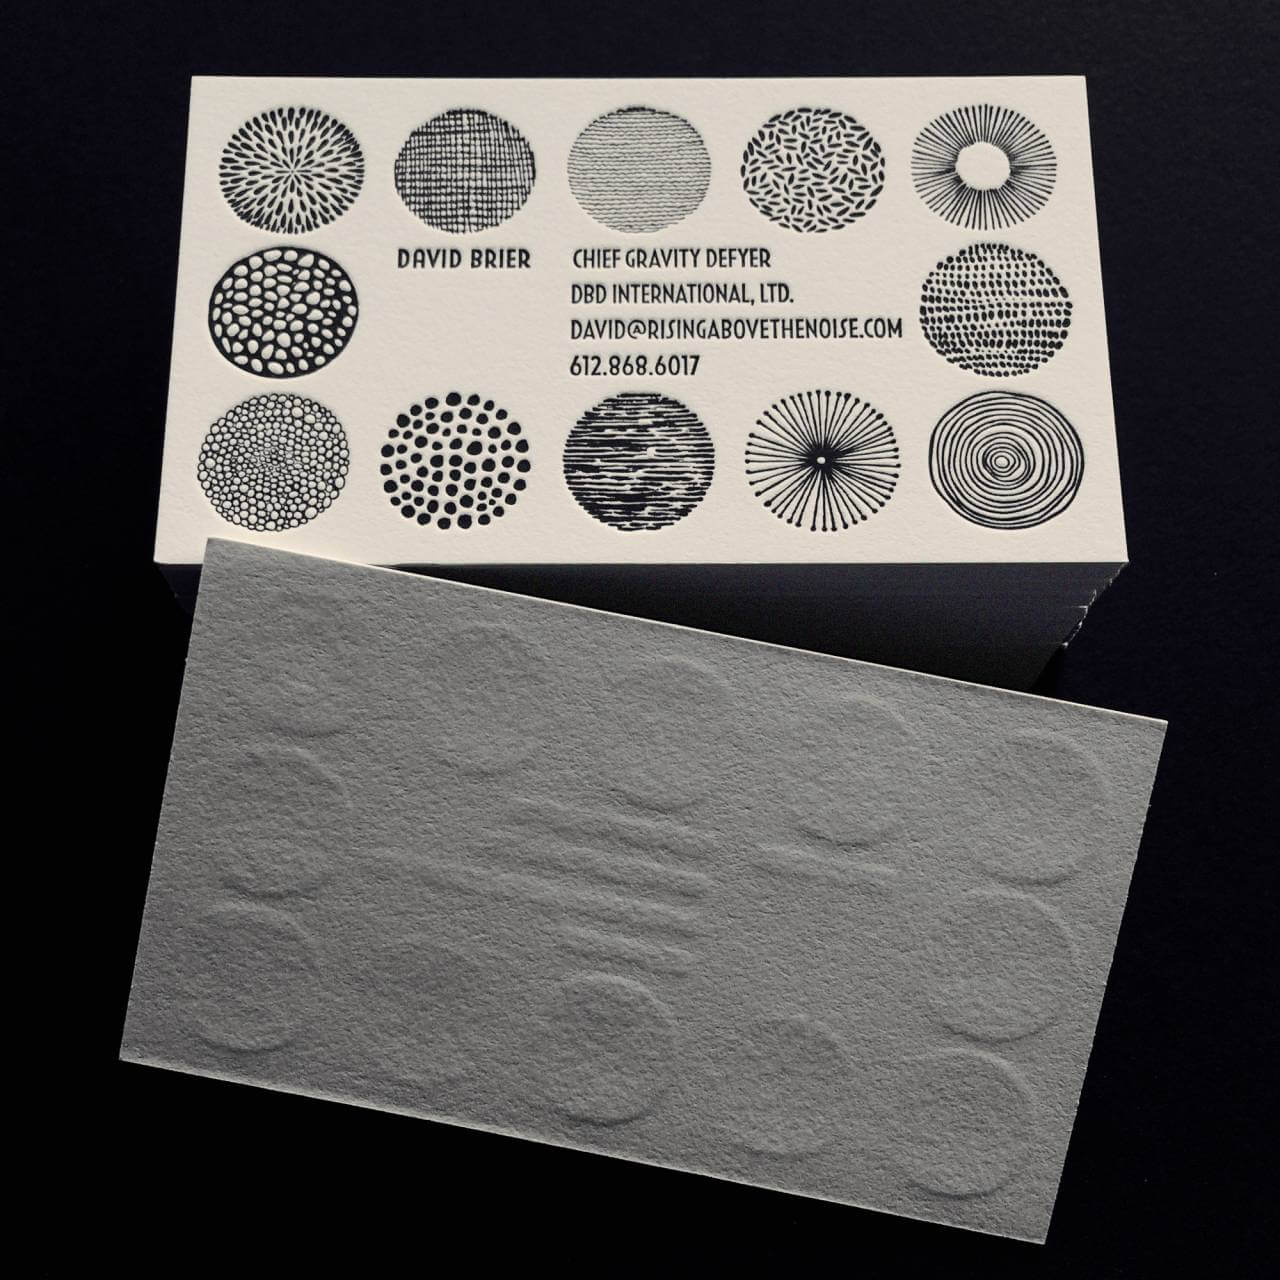 BUSINESS-CARDS-FROM-TOP